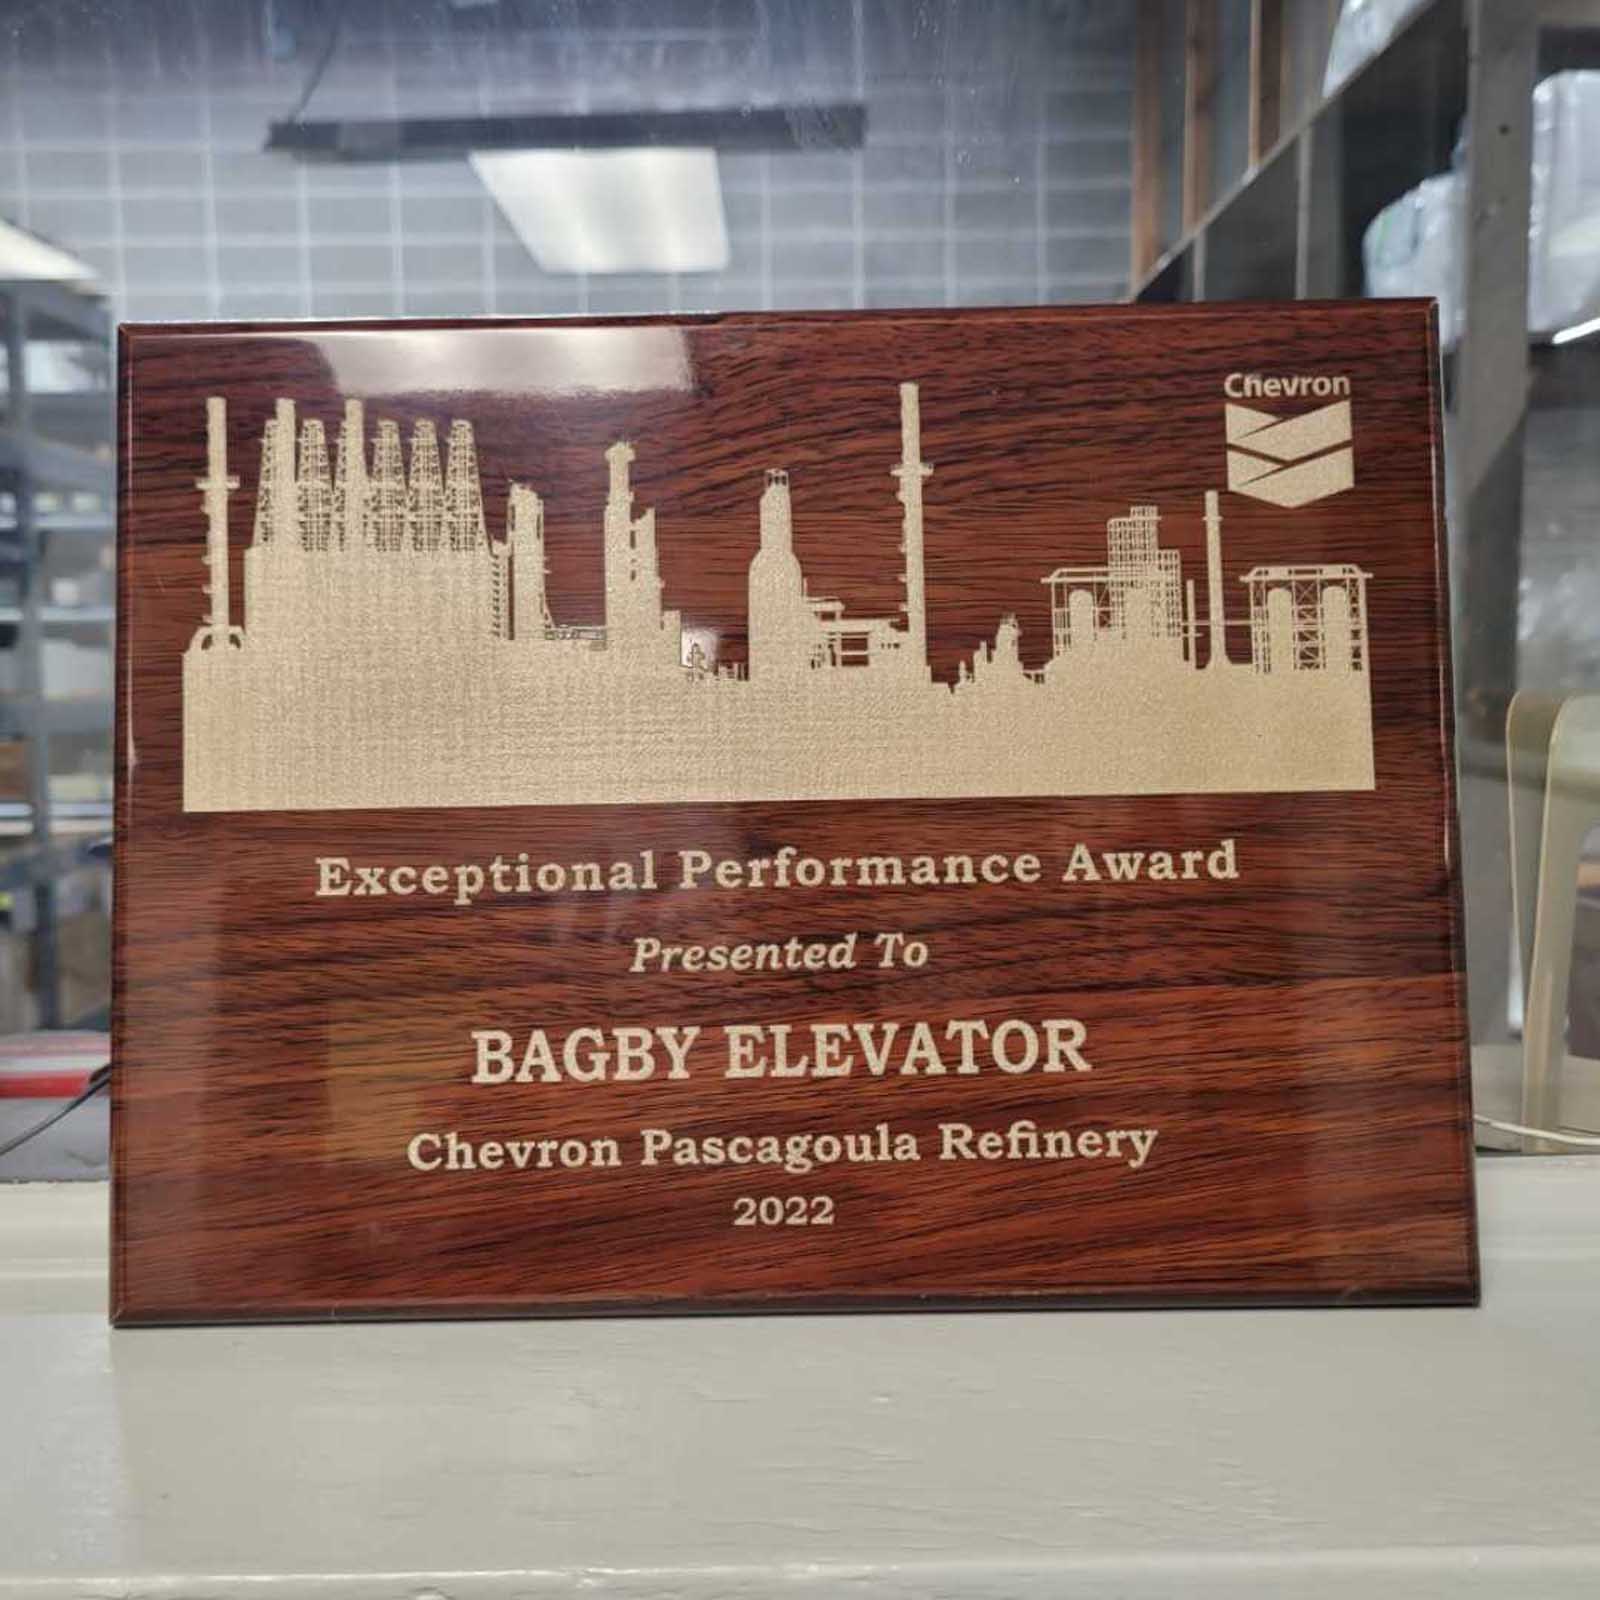 Bagby Elevator Wins Performance Award From Chevron